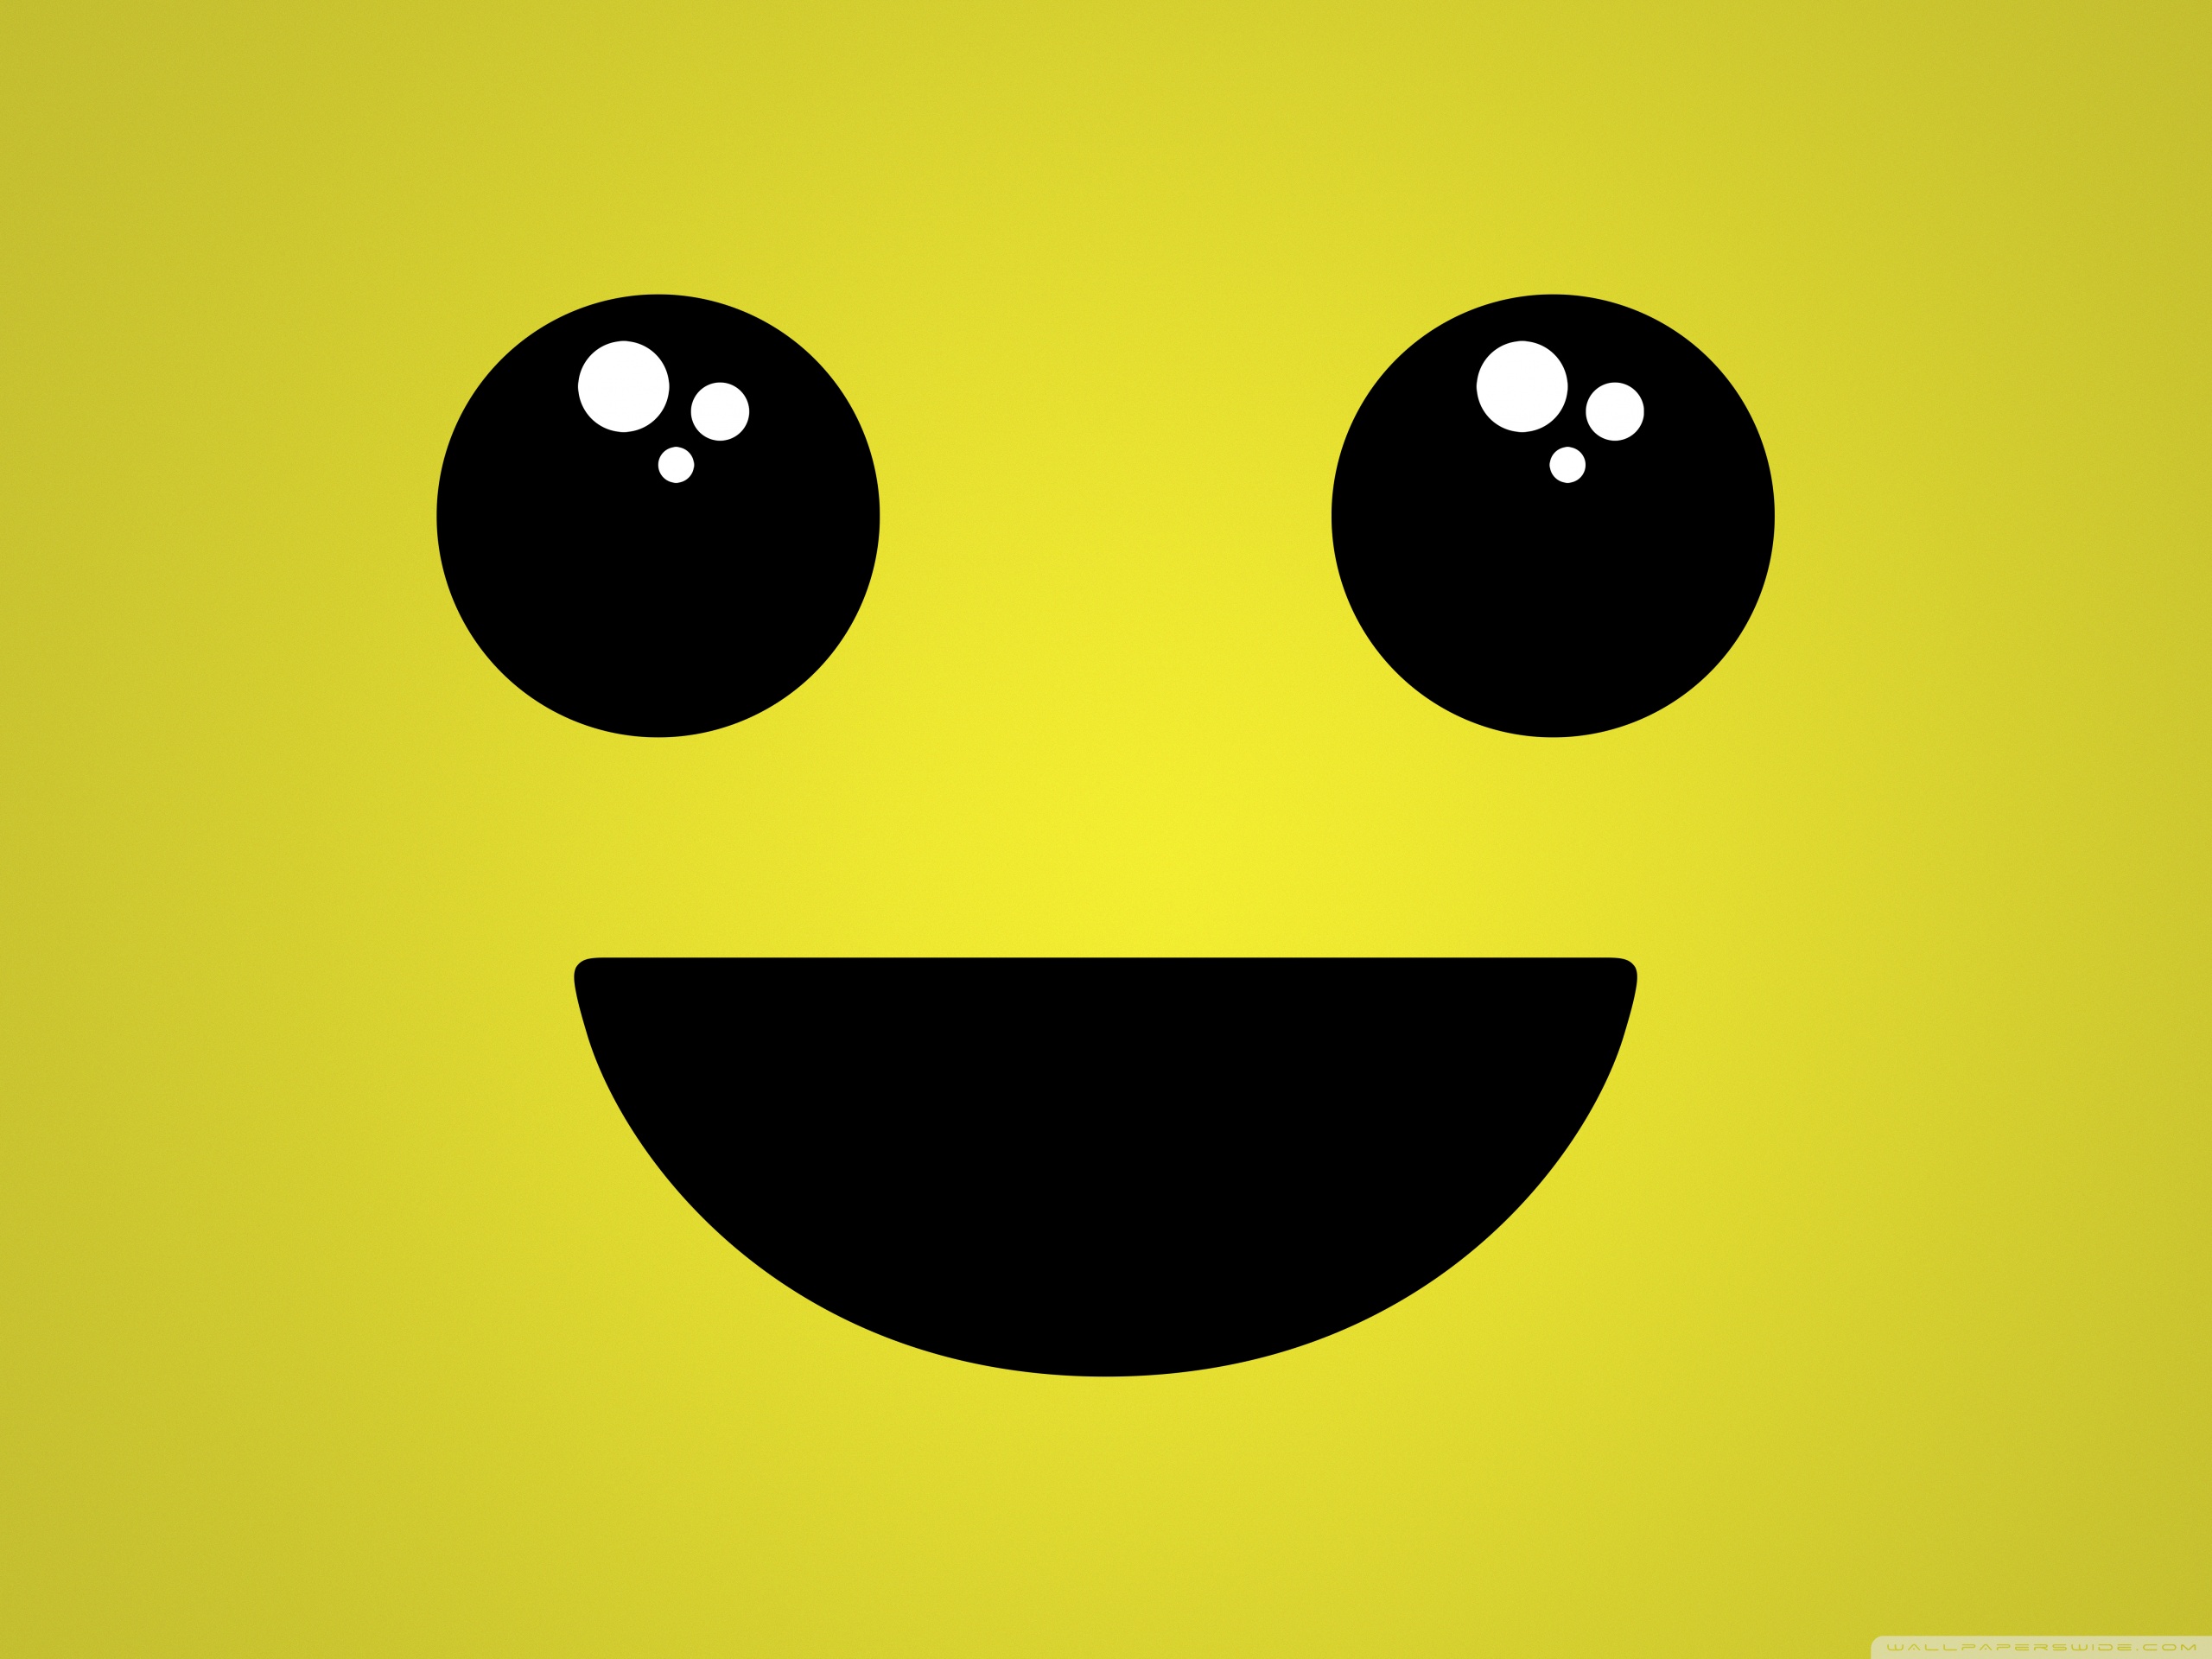 Emoji Wallpaper - Cute Backgrounds:Amazon.com:Appstore for Android